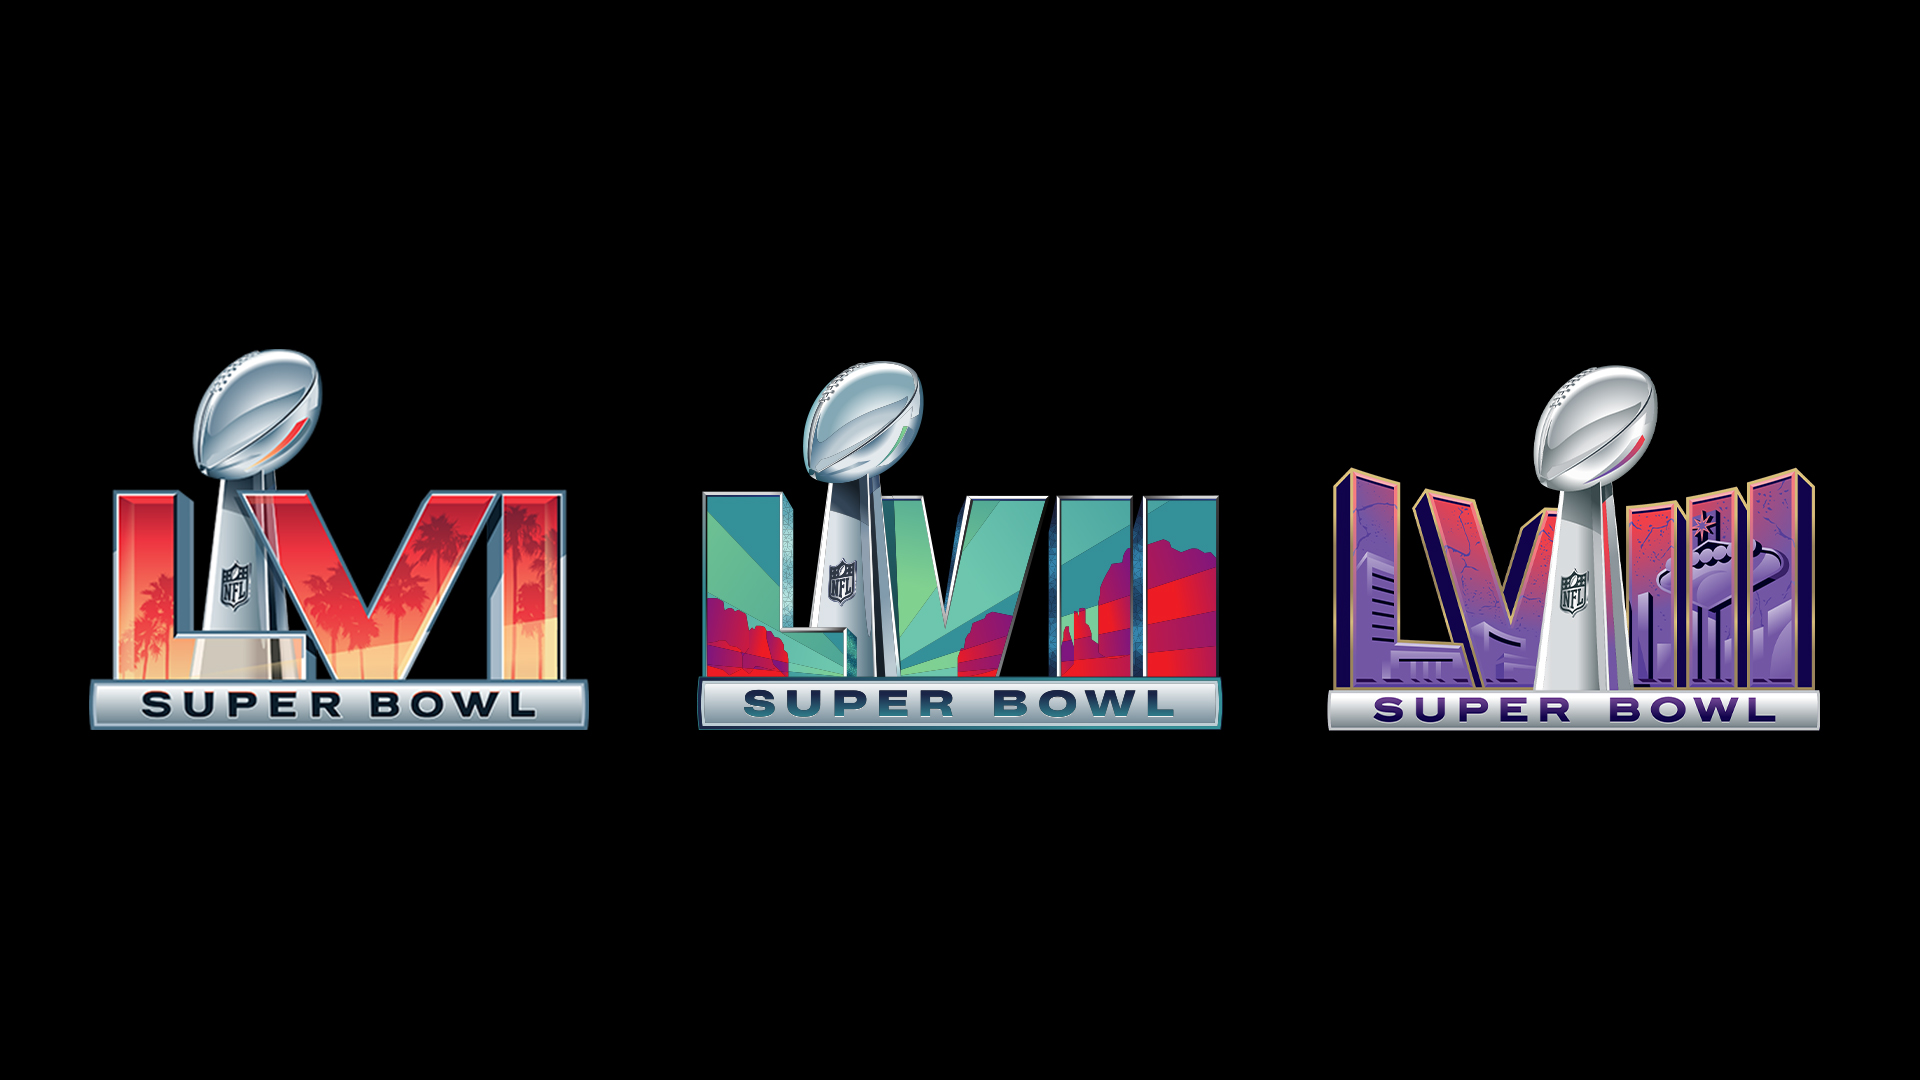 The NFL Super Bowl logo conspiracy is so outlandish I almost hope it's